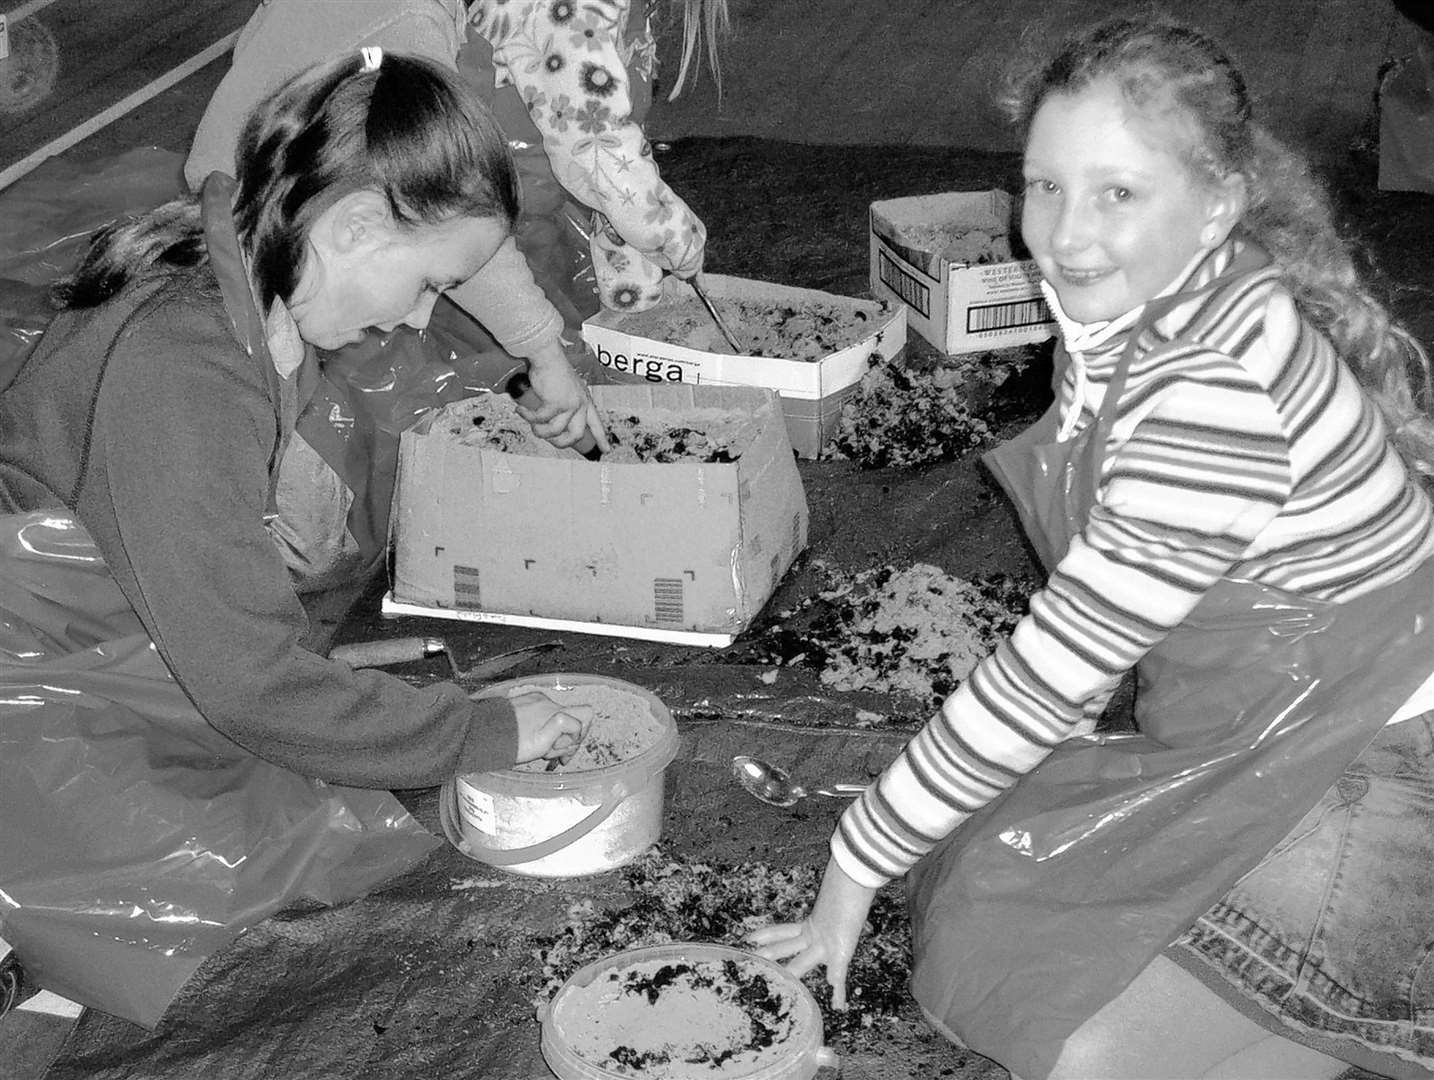 Two of the Caithness Young Archaeologists at a session Dunnet in 2006, learning how to excavate the postholes of a hut circle.